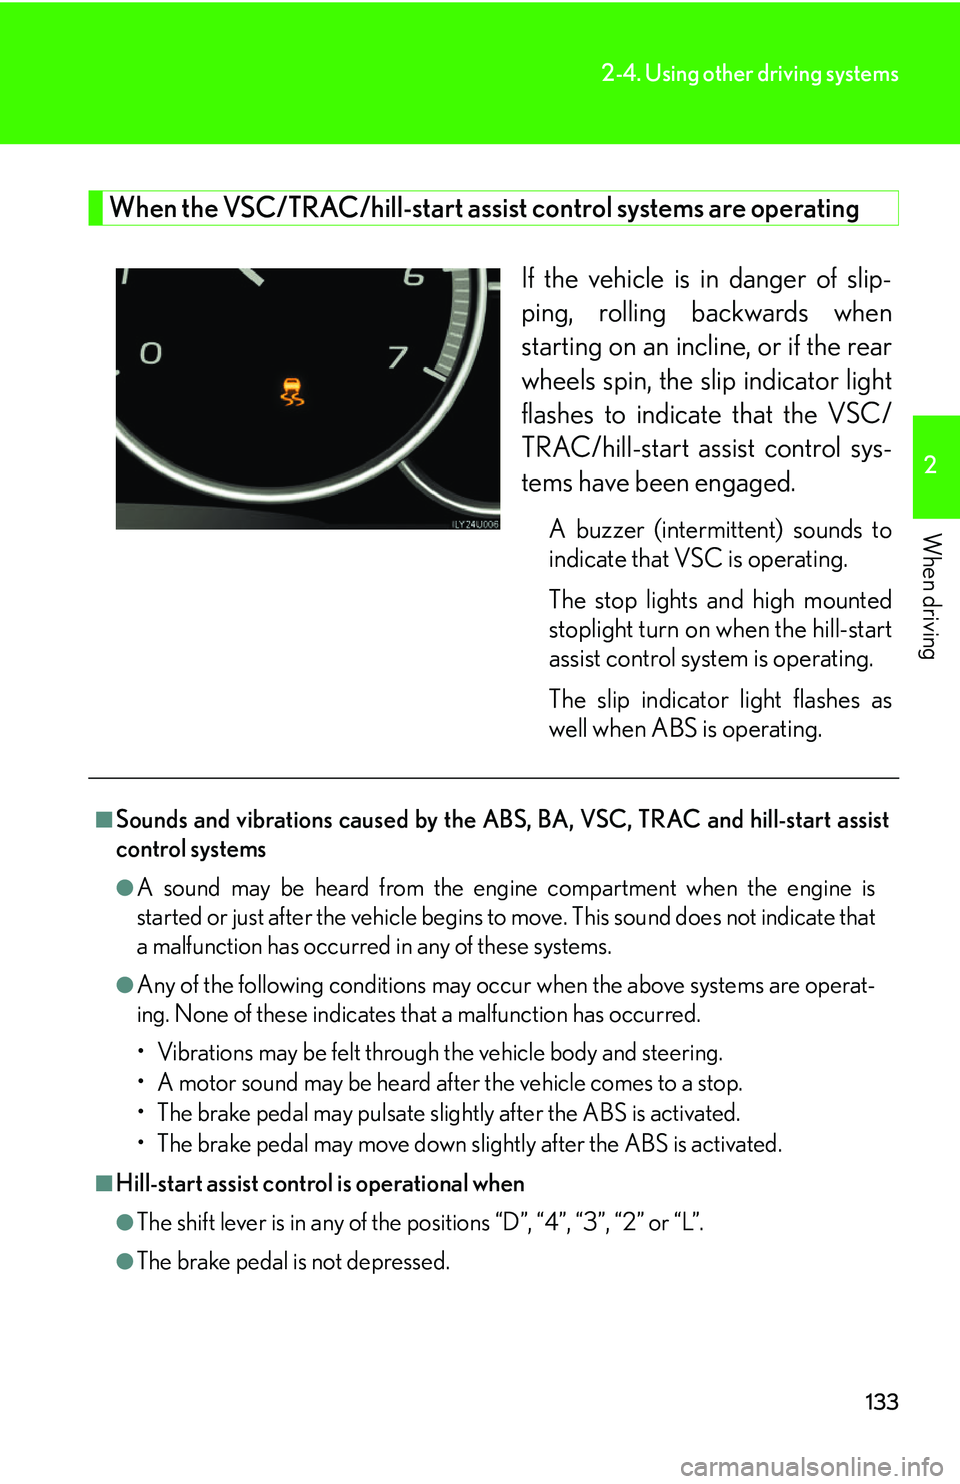 Lexus GX470 2007  Instrument cluster / LEXUS 2007 GX470 OWNERS MANUAL (OM60C64U) 133
2-4. Using other driving systems
2
When driving
When the VSC/TRAC/hill-start assist control systems are operating
If the vehicle is in danger of slip-
ping, rolling backwards when
starting on an i